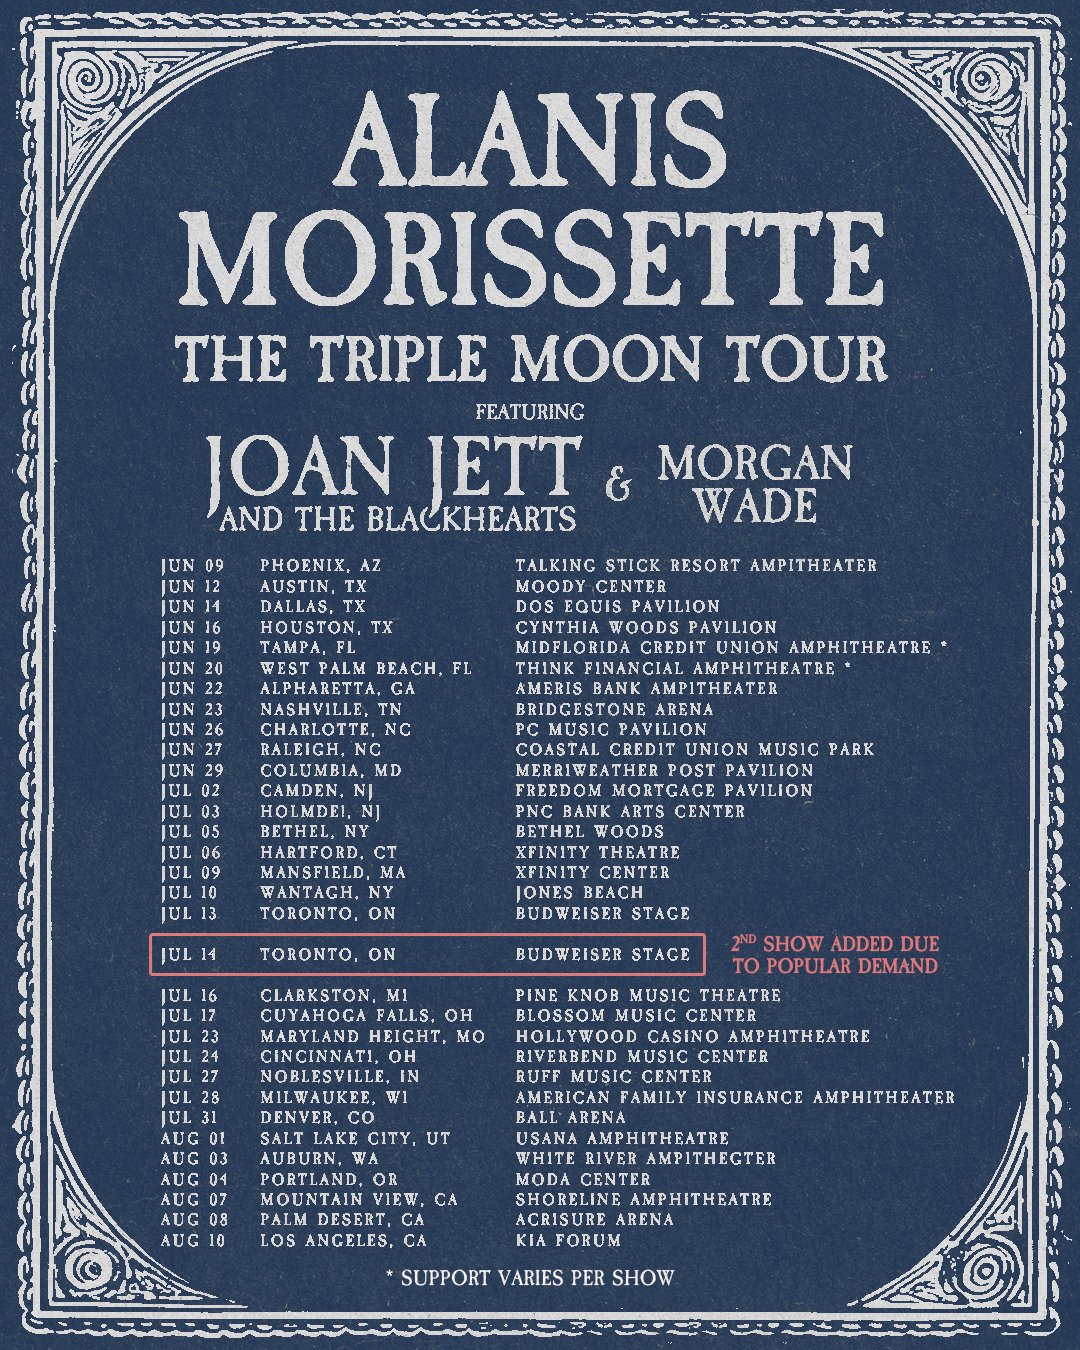 Alanis Morissette on X: "the Triple Moon Tour is on sale now! soooo excited to be on the road with @JoanJett & @TheMorganWade. hope to see you there. love you 💖💕💕 https://t.co/fcq85Rgl4Q #